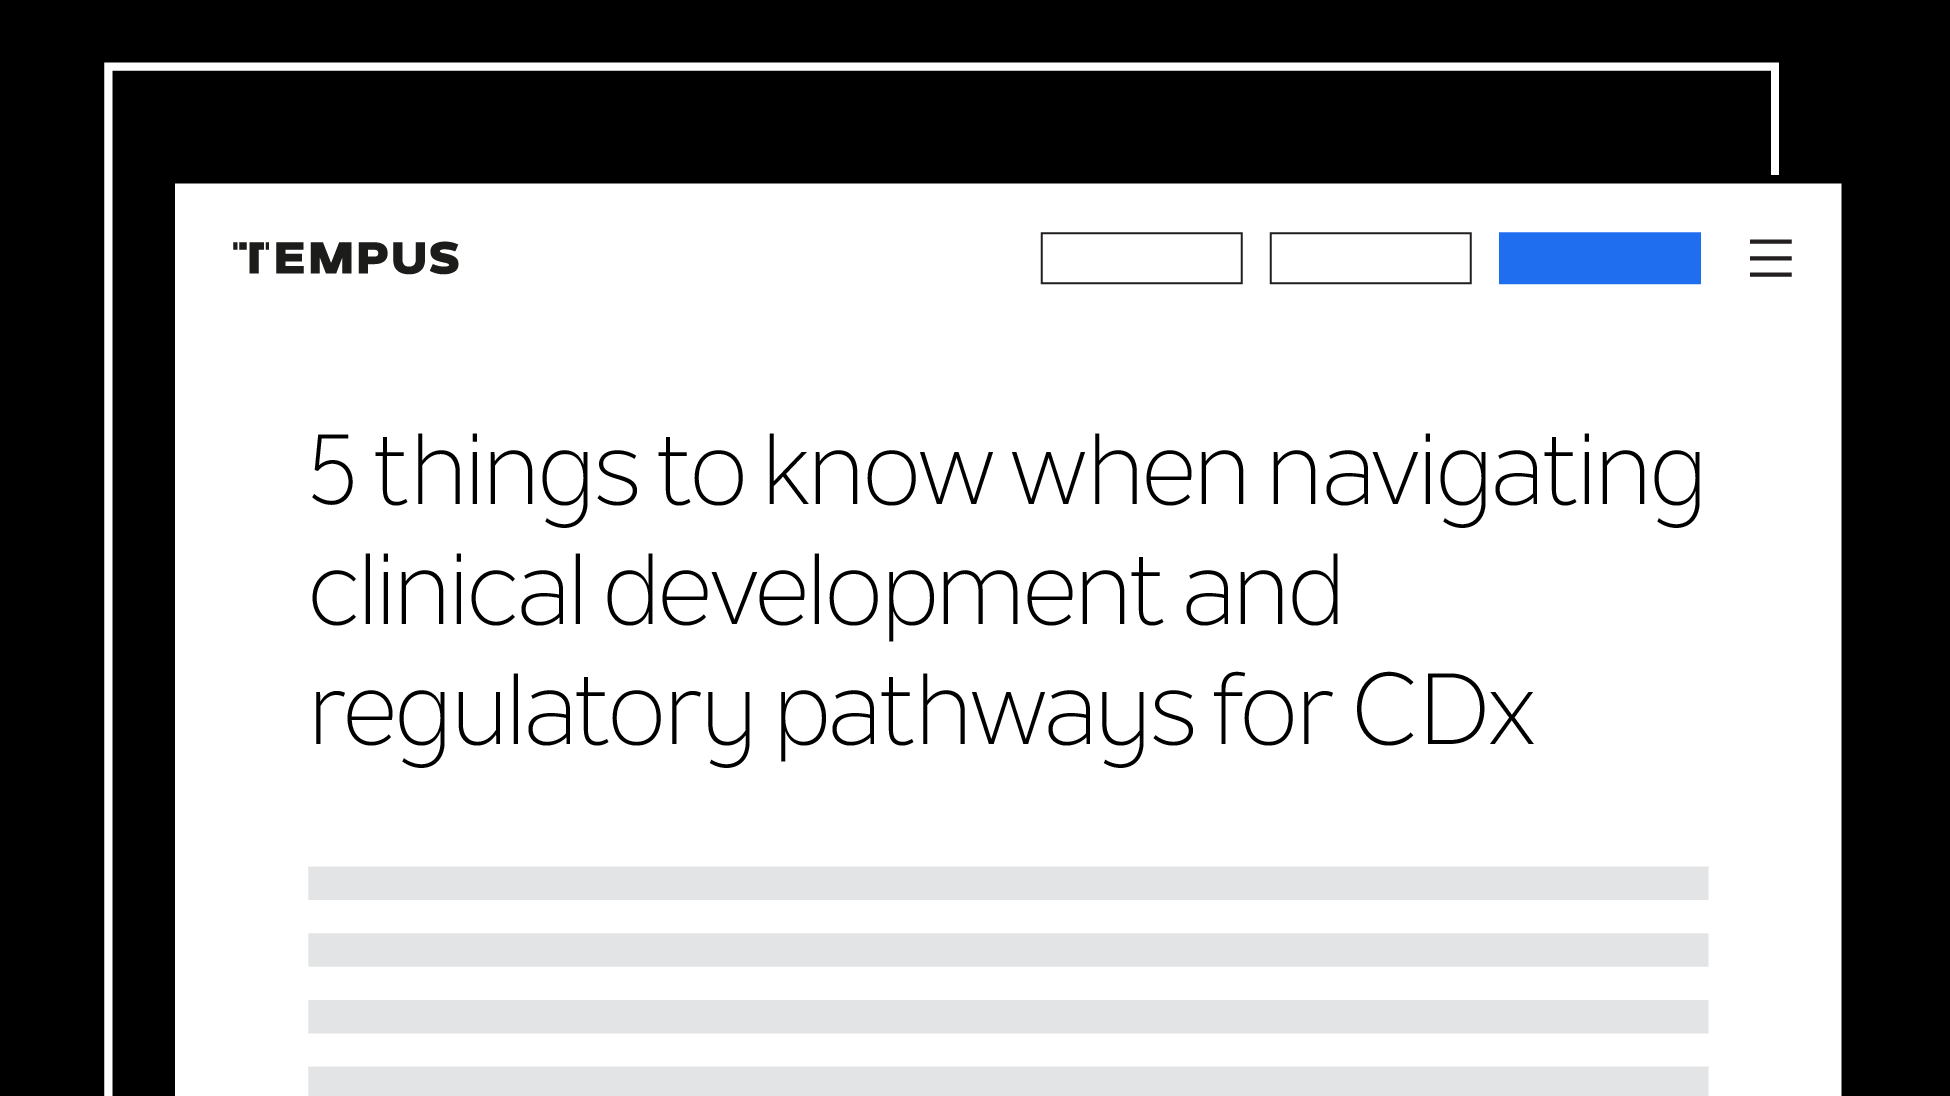 5 things to know when navigating clinical development and regulatory pathways for CDx